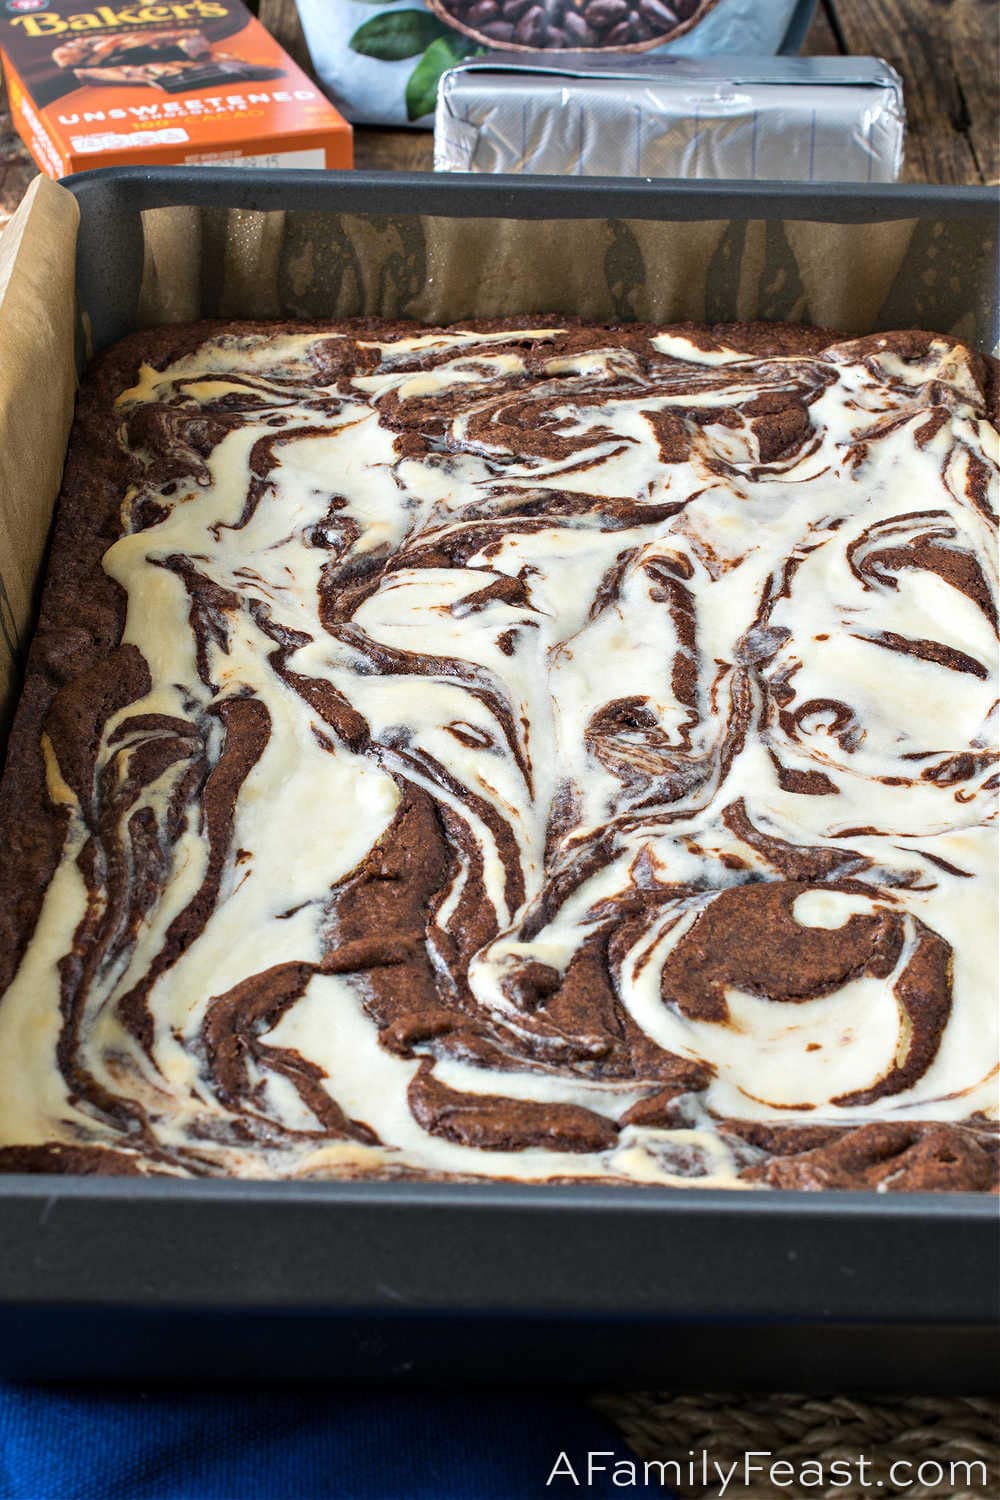 Cream Cheese Brownies - A Family Feast